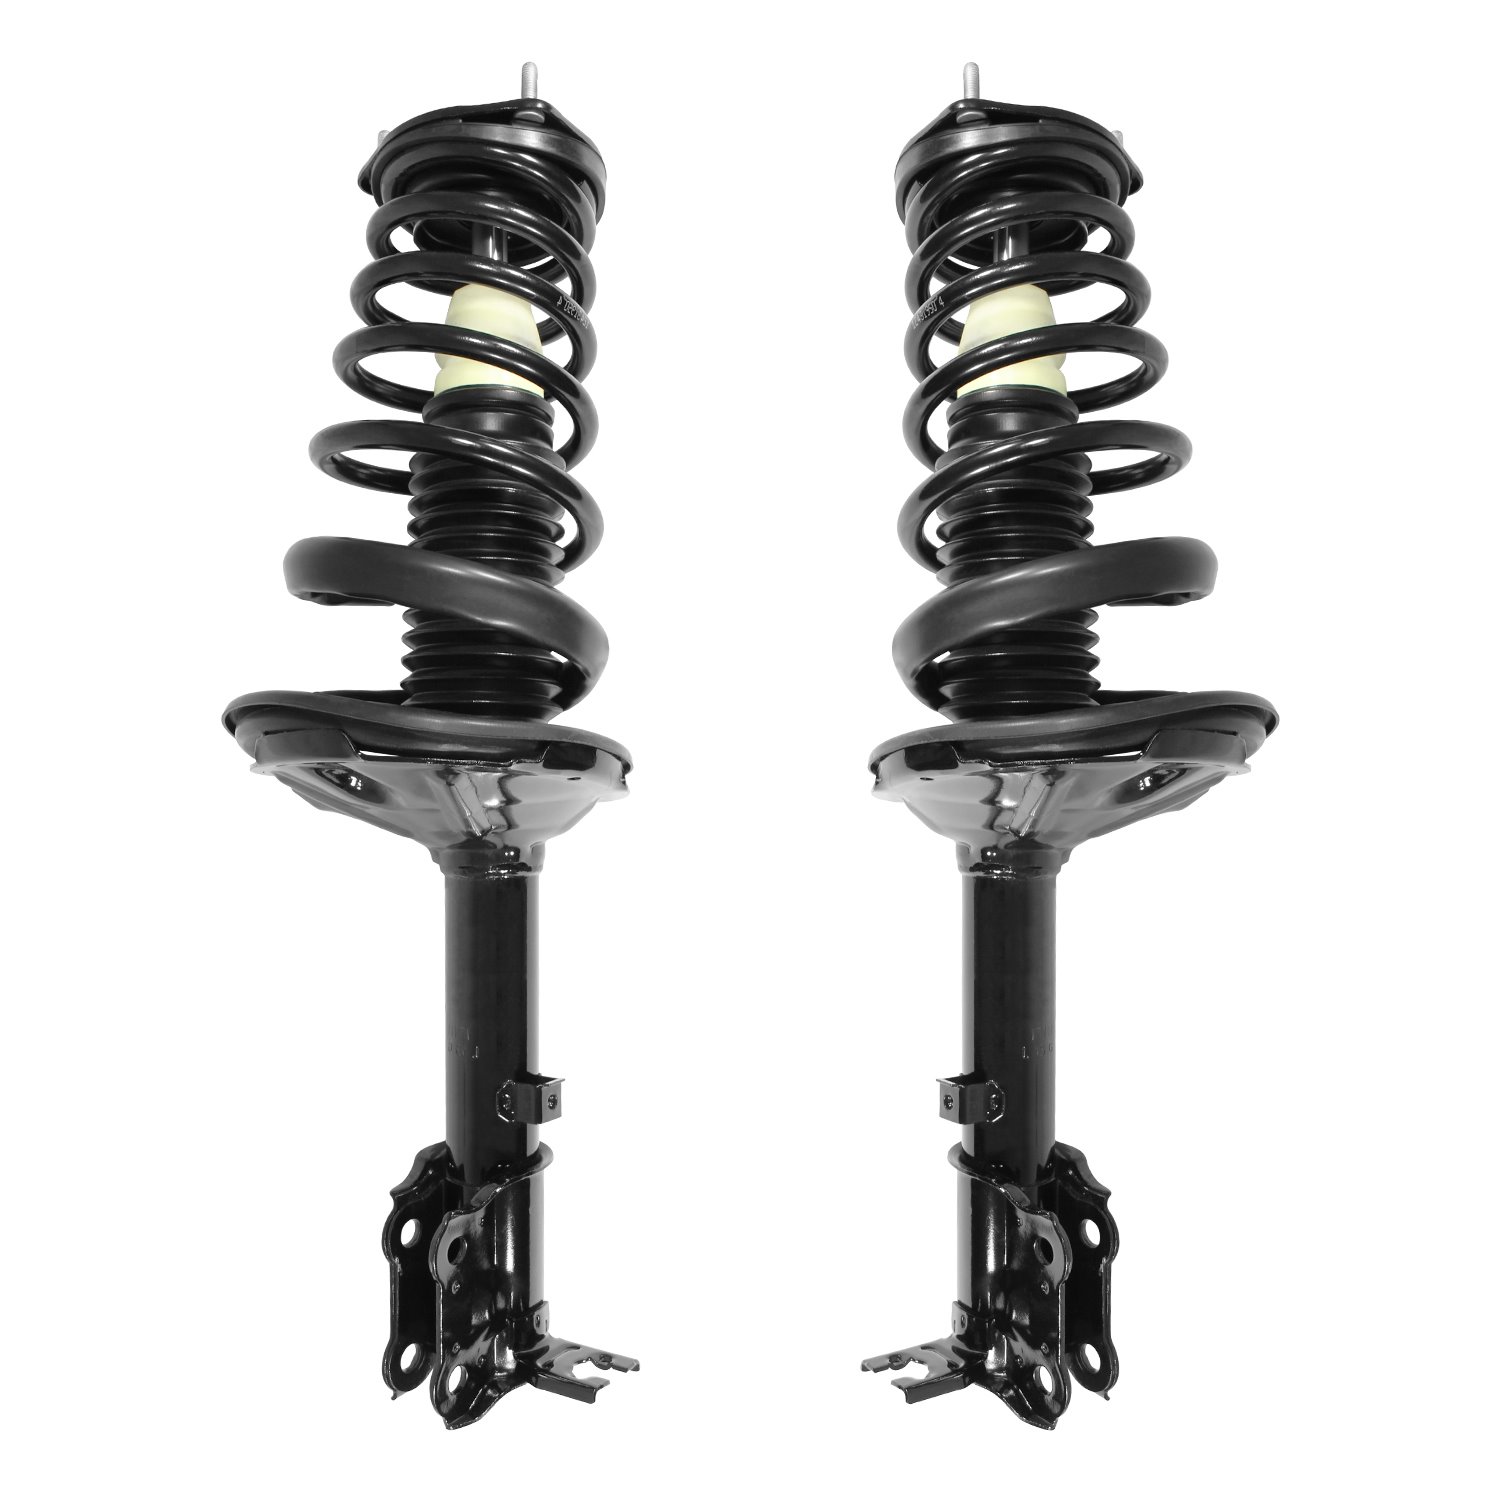 2-15111-15112-001 Suspension Strut & Coil Spring Assembly Set Fits Select Hyundai Accent